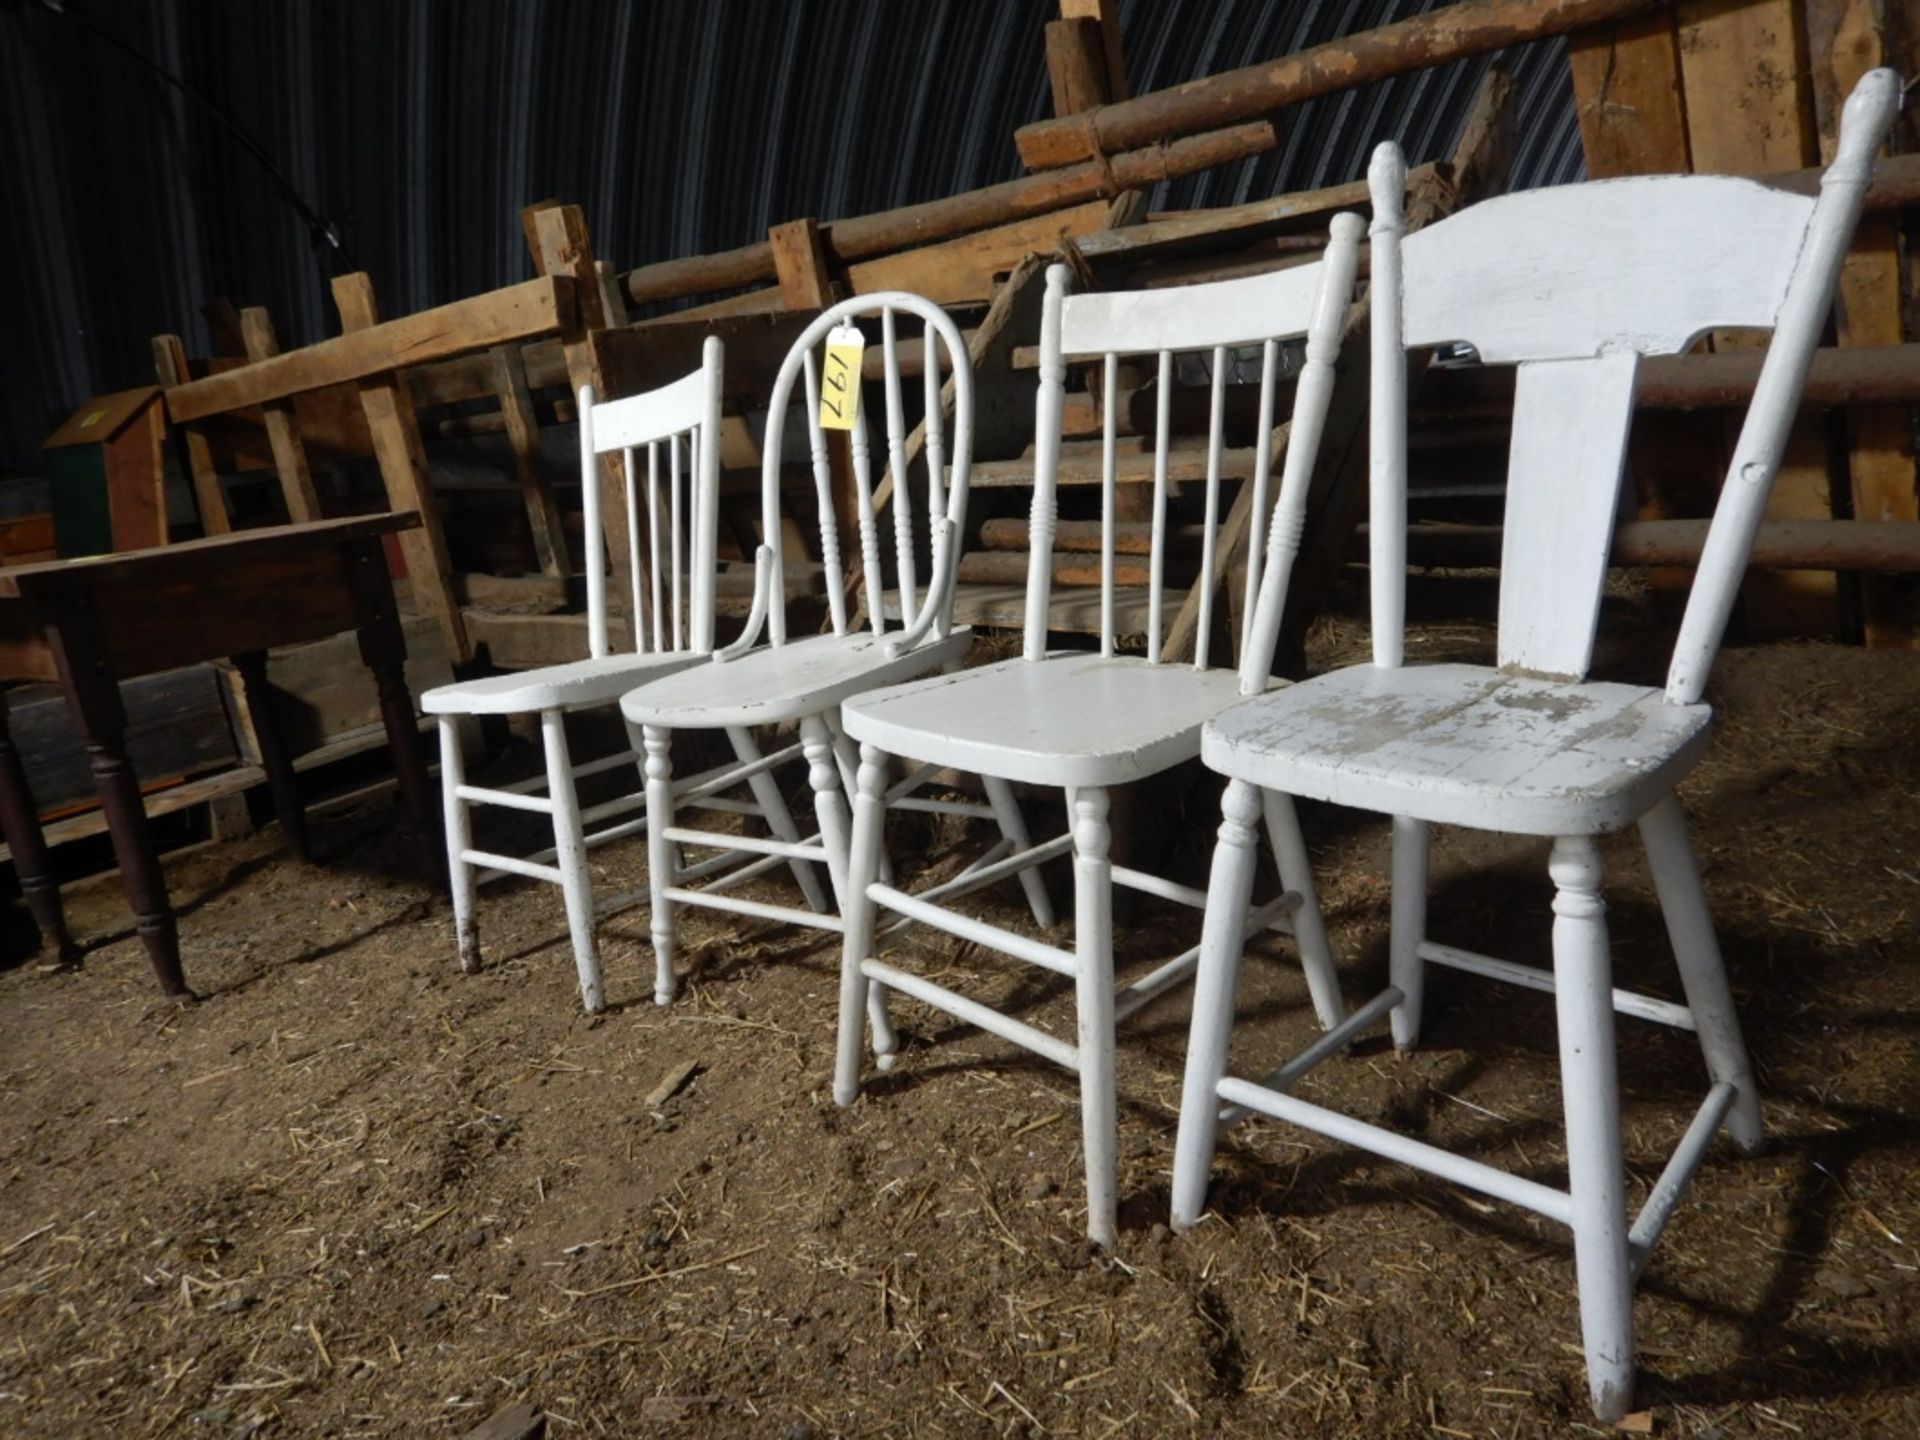 4-ASSORTED WOODEN CHAIRS PAINTED WHITE